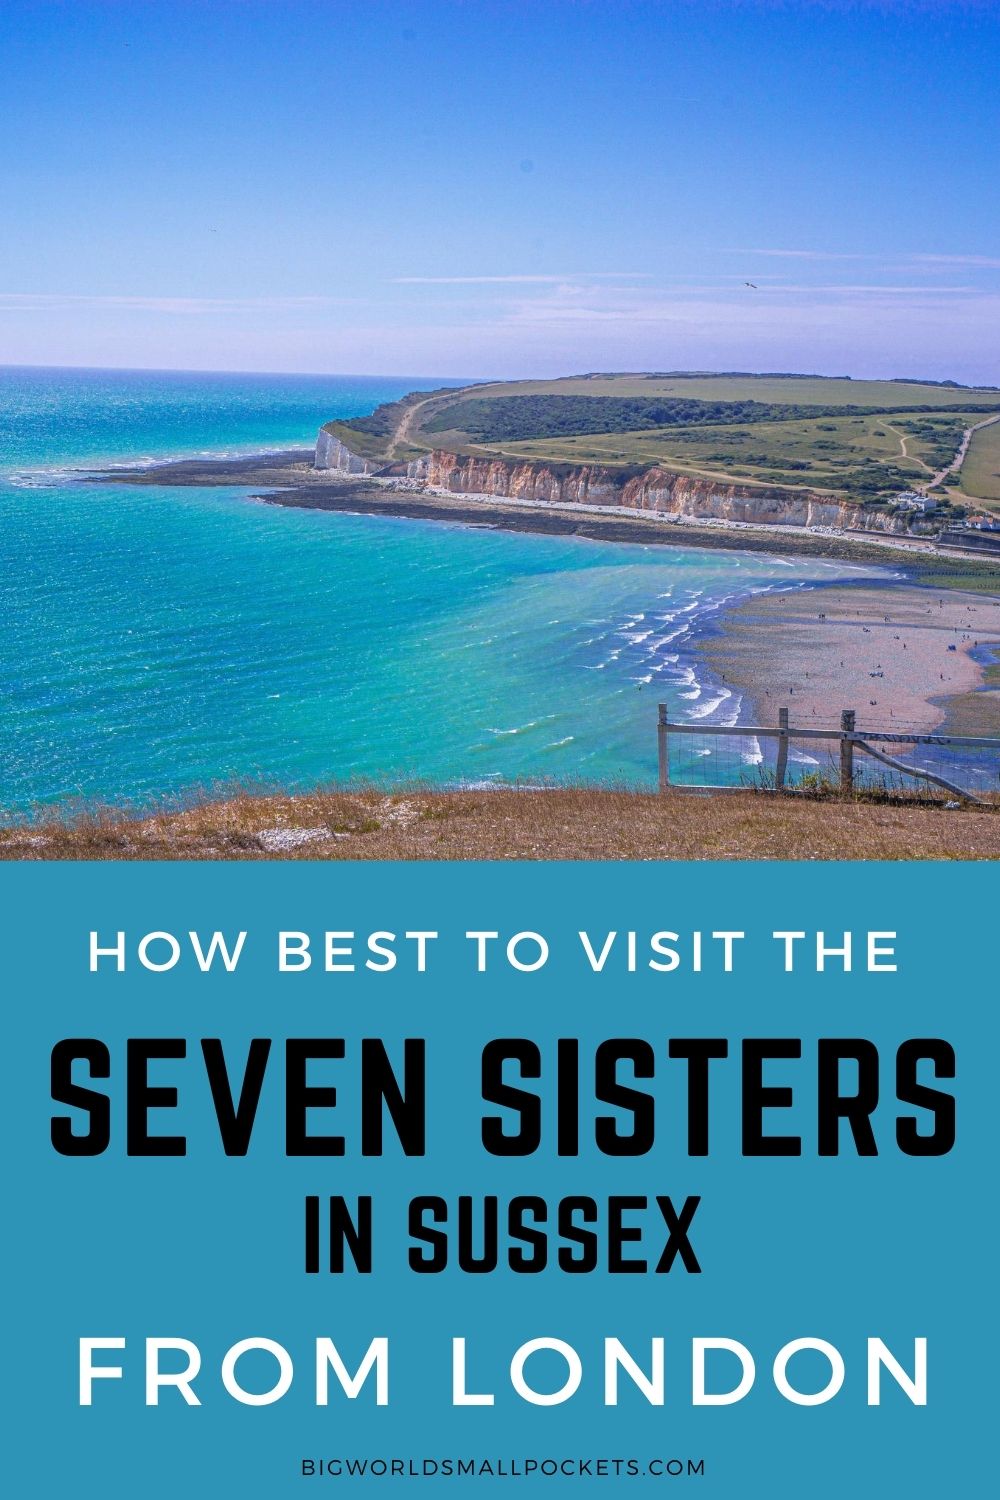 How Best to Visit the Seven Sisters Cliffs on a London Day Trip